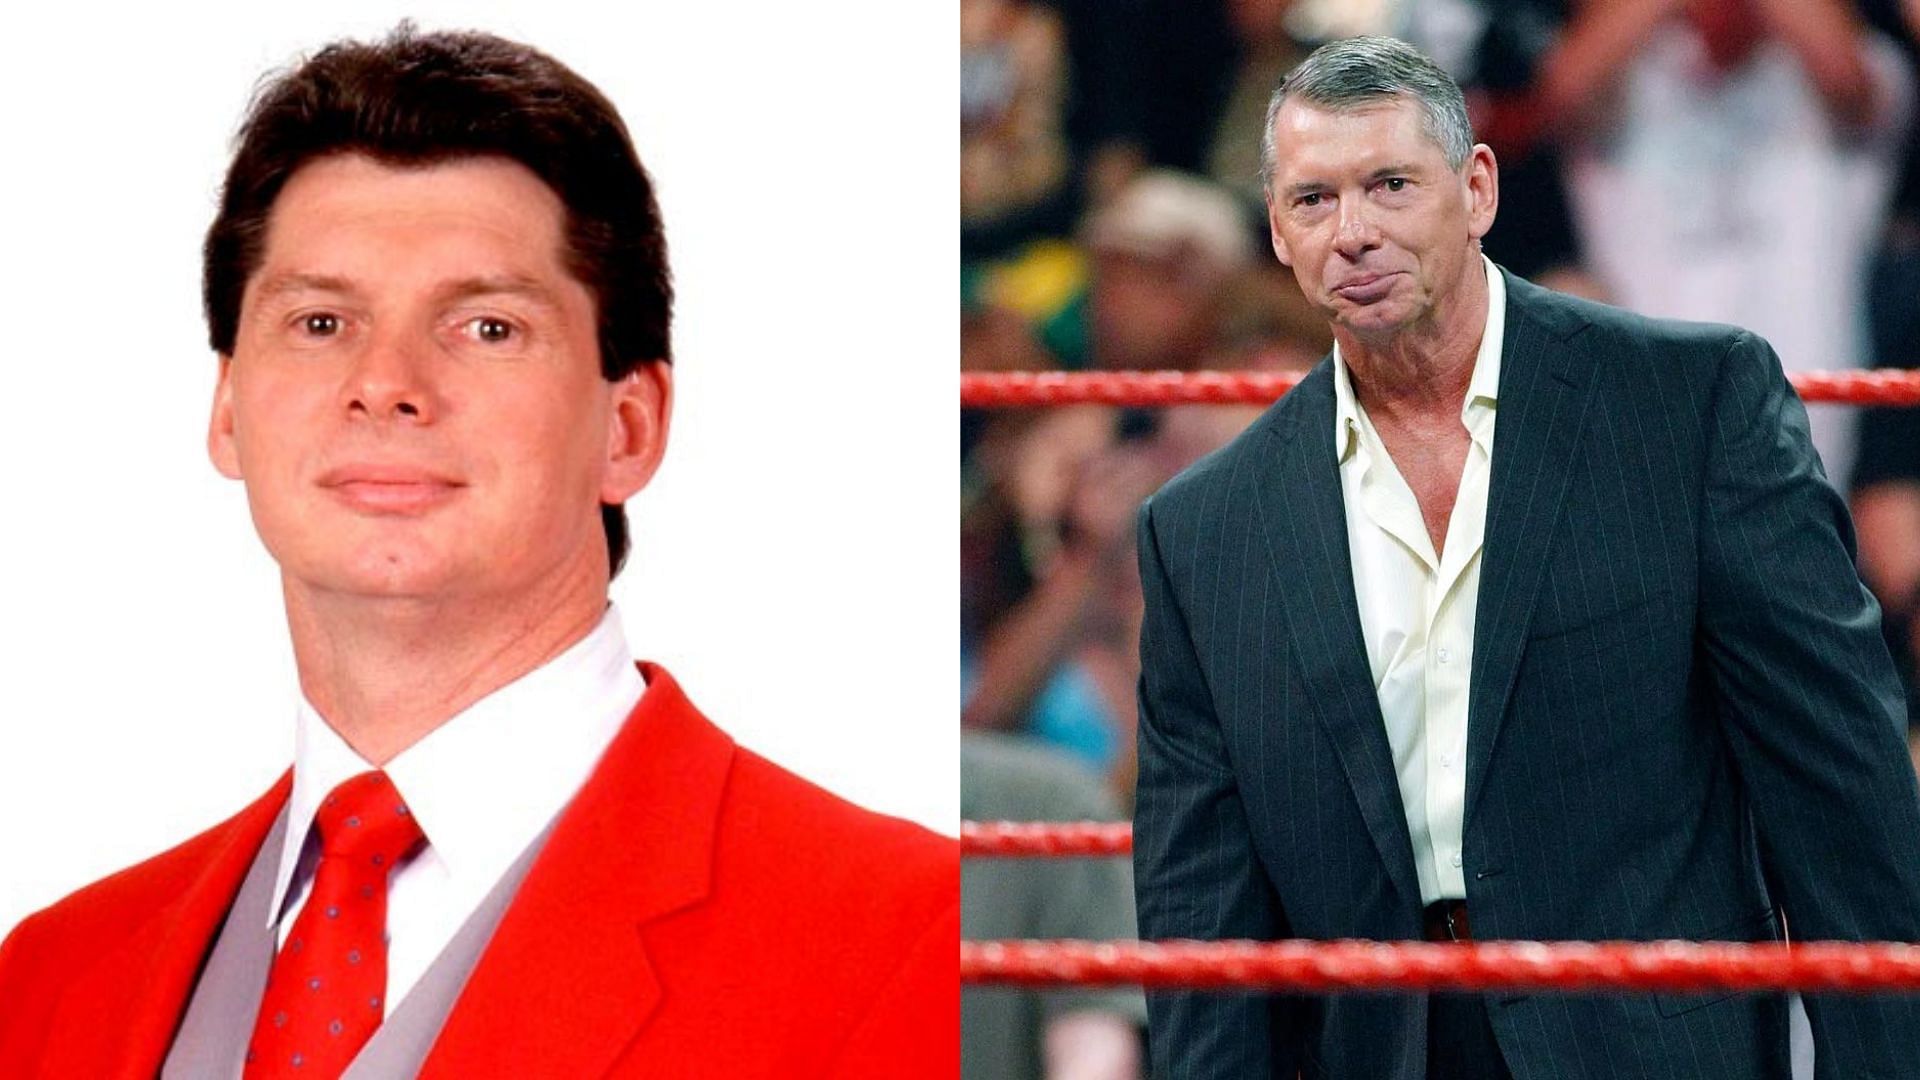 Vince McMahon Age: What is Vince McMahon's age and how long has he